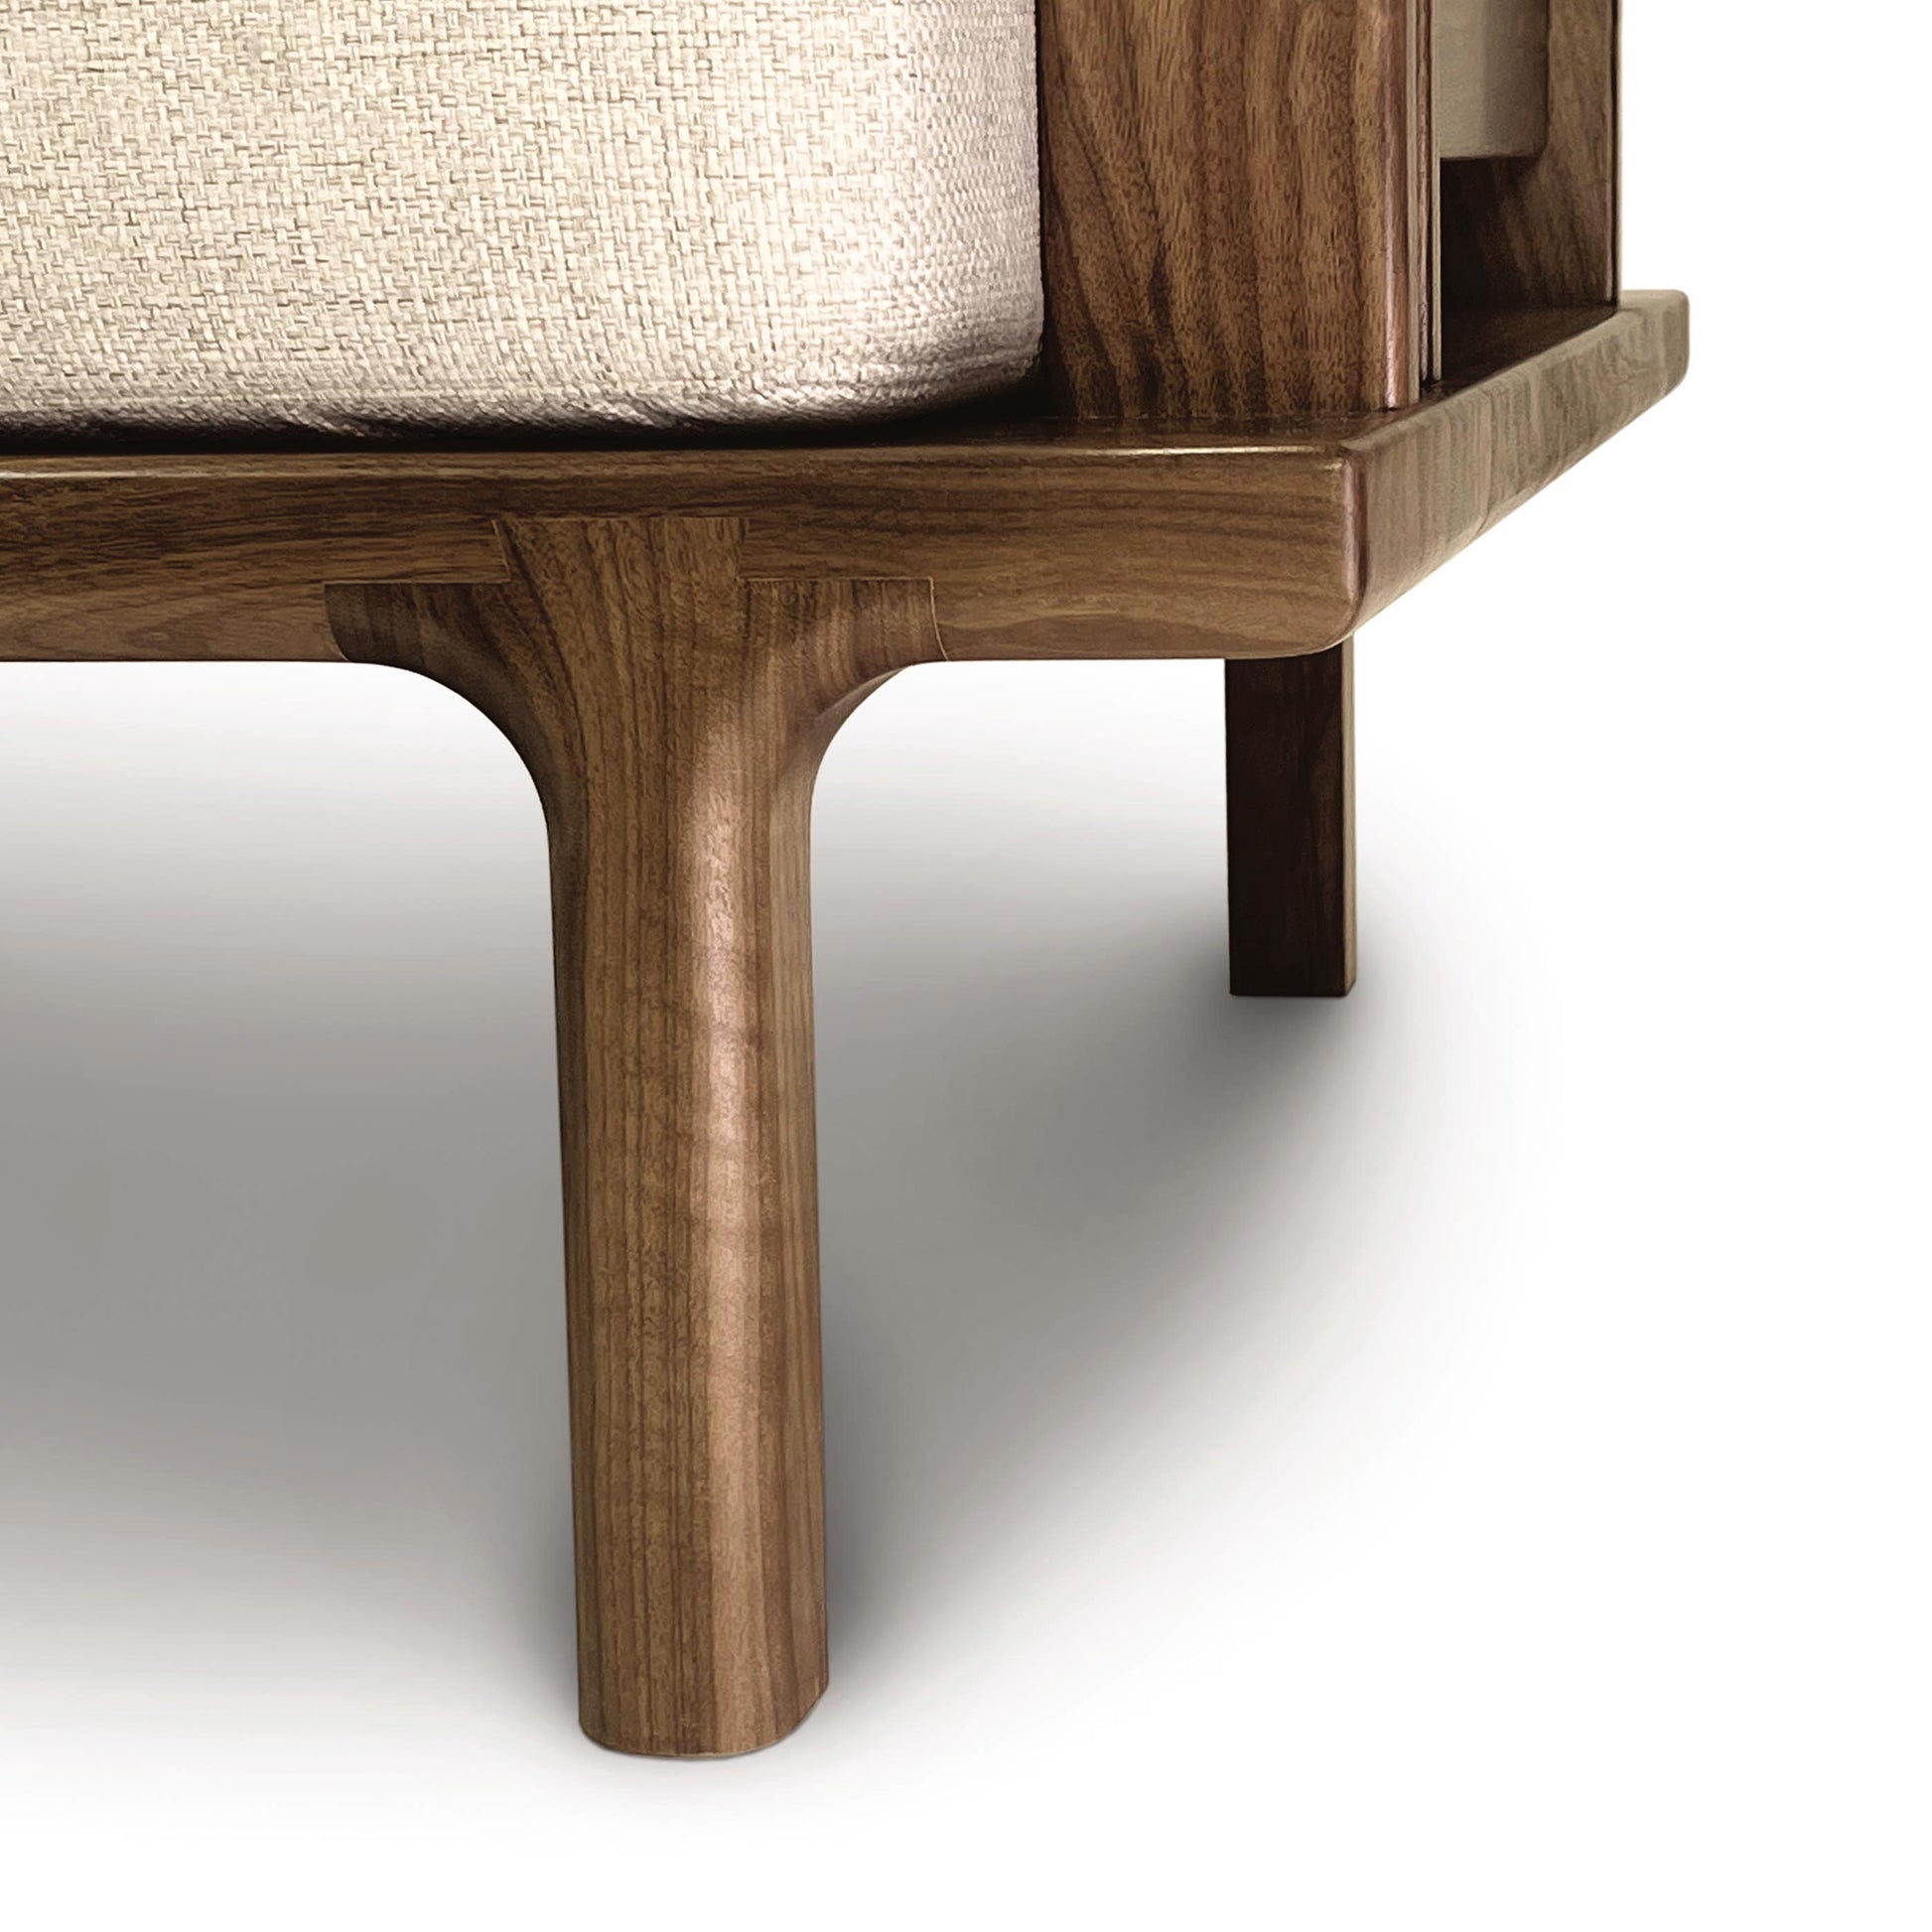 A contemporary close up of the Sierra Walnut Upholstered Sofa design by Copeland Furniture.